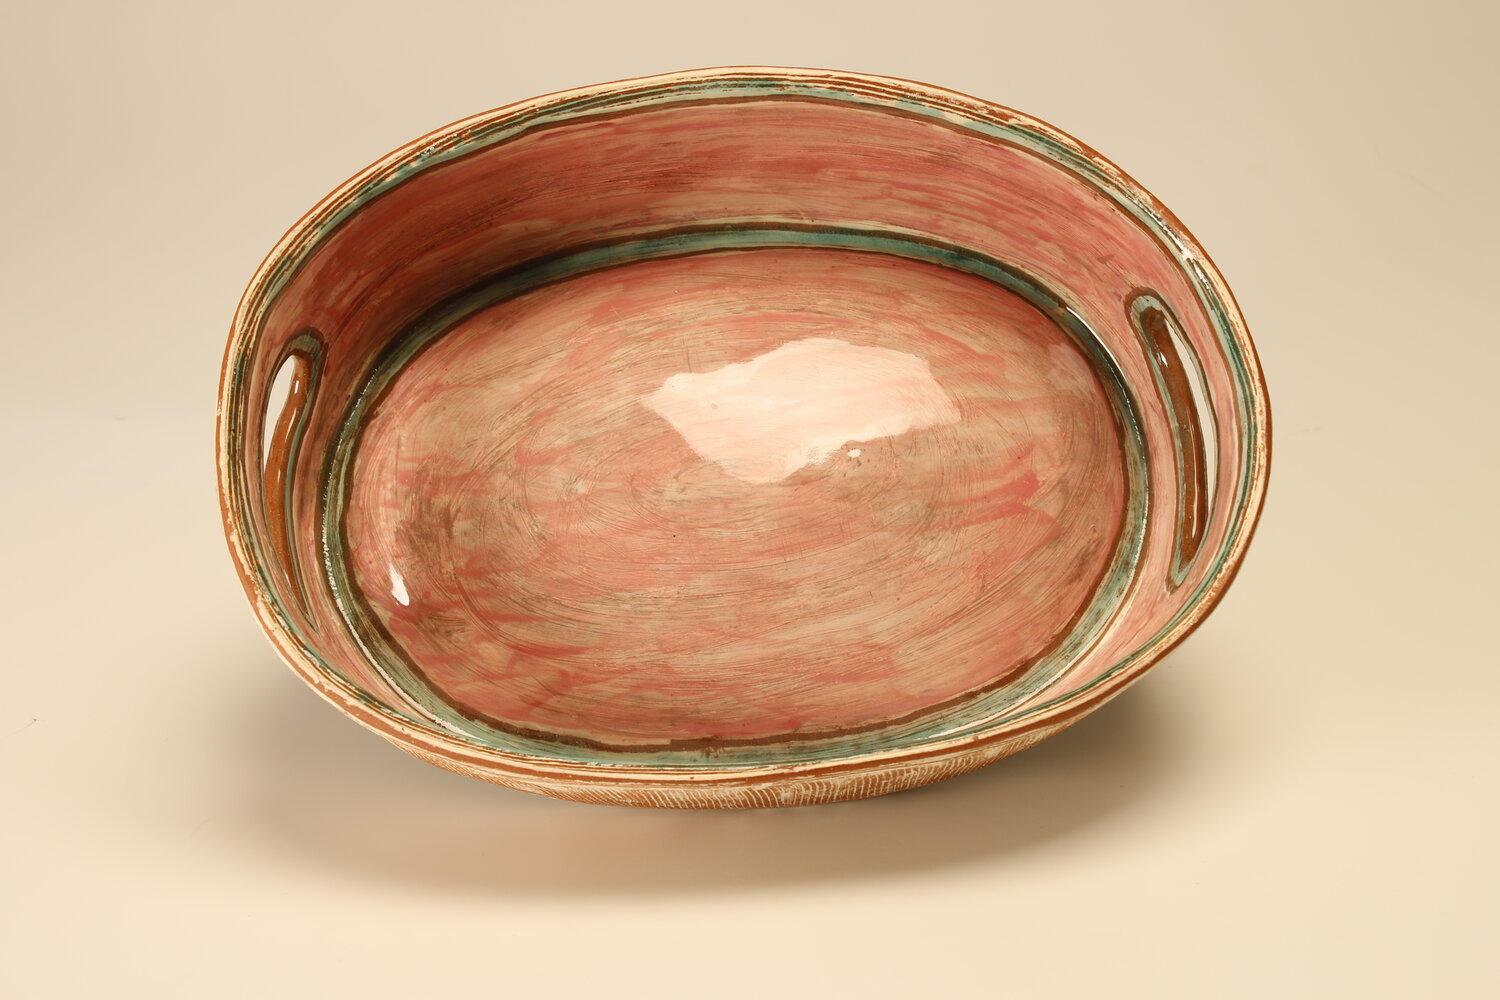 pink ceramic platter with copper interior, image courtesy of the artist